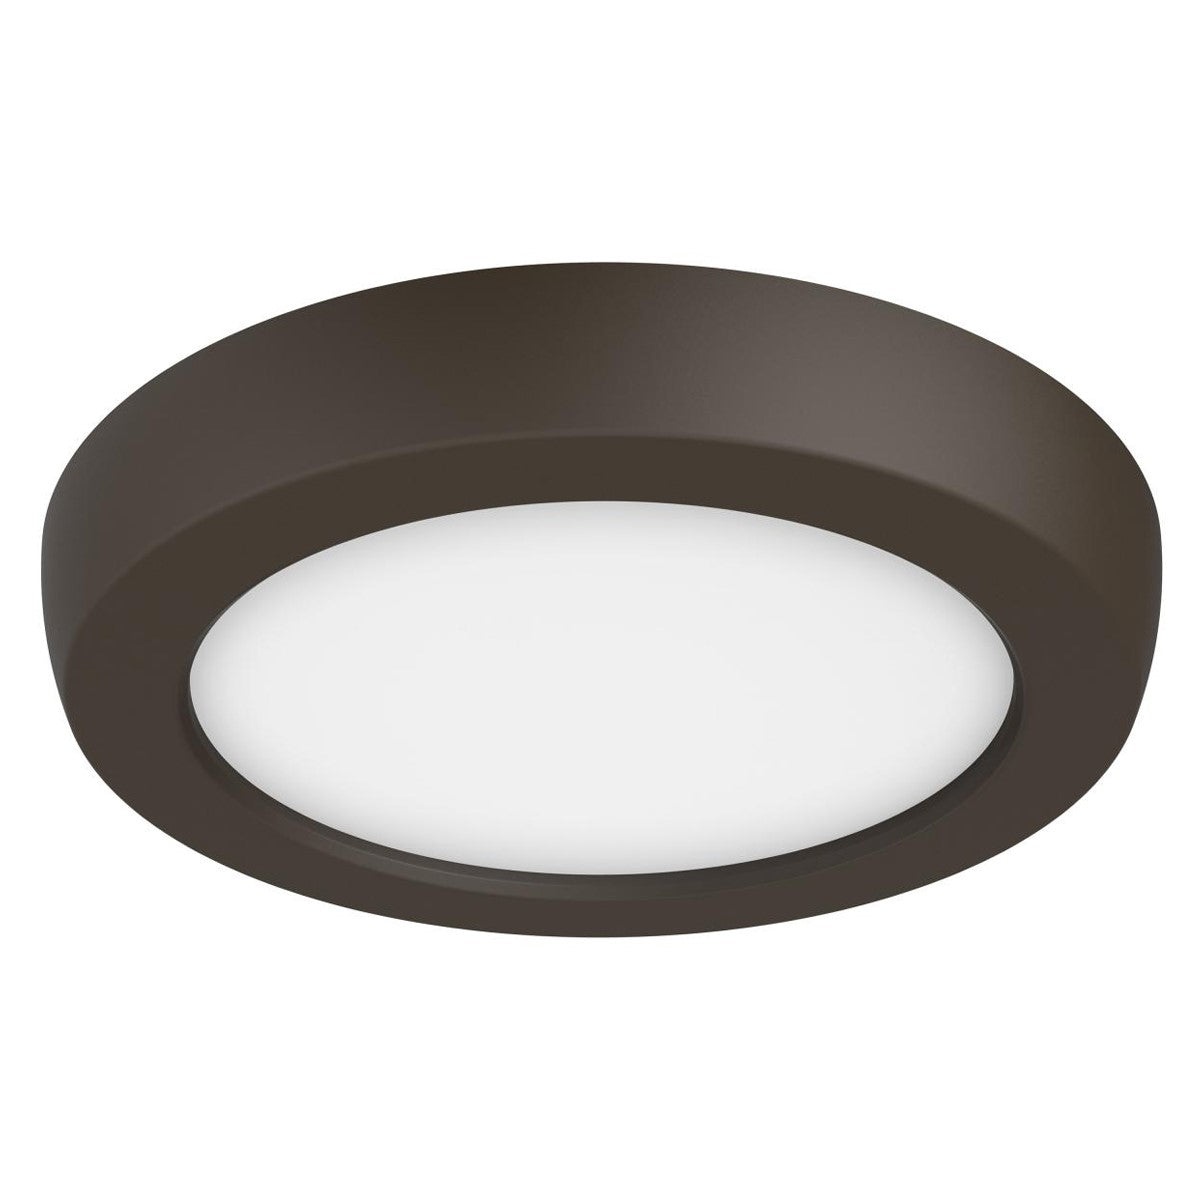 Blink 5 in. LED Round Disk Light 9W Selectable CCT